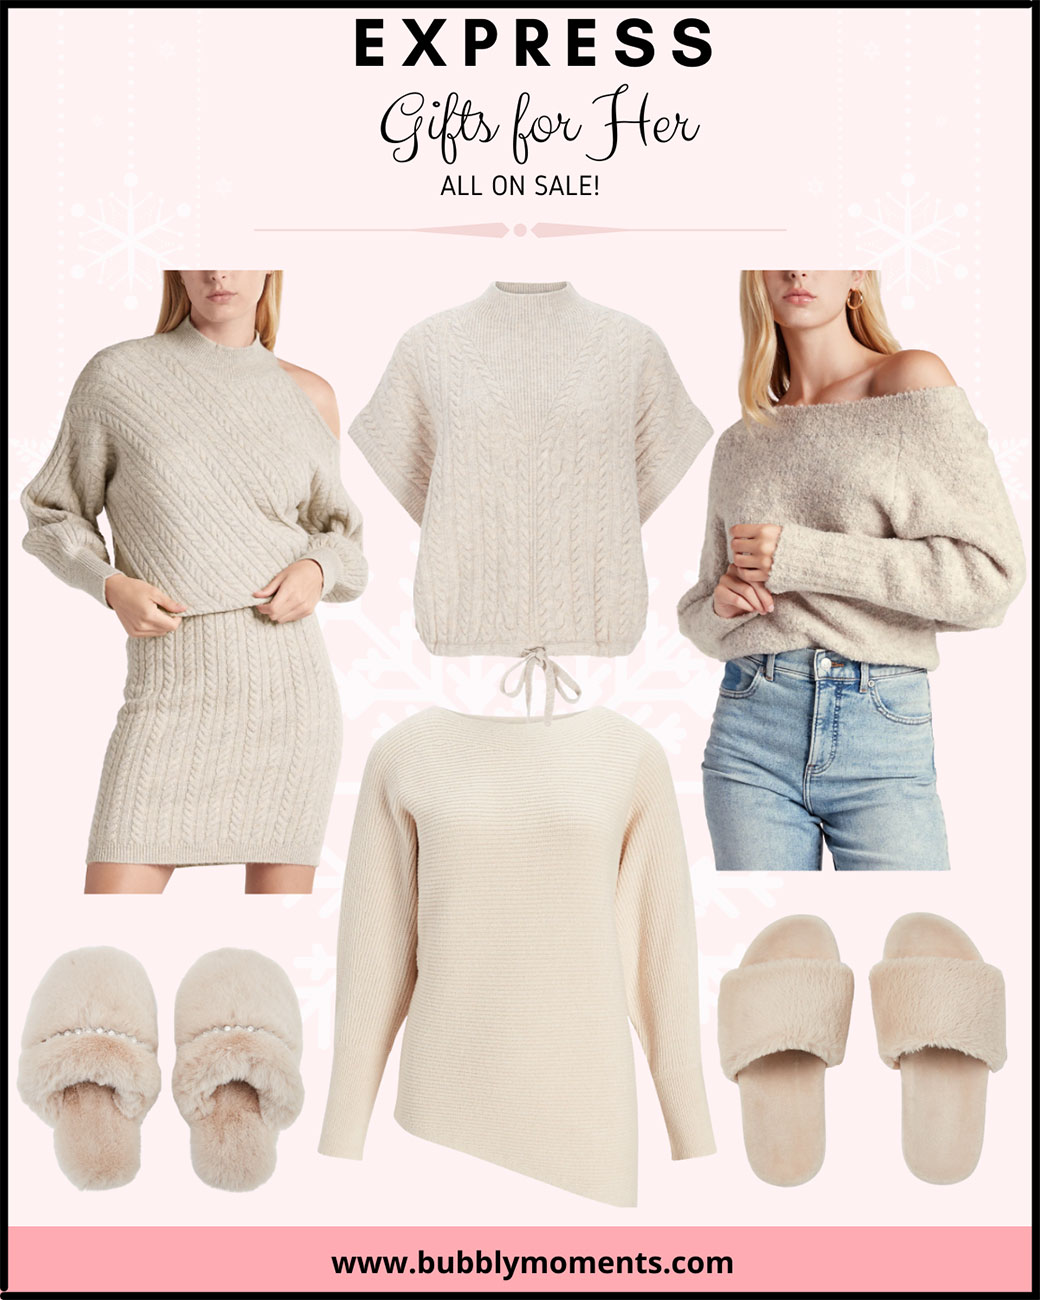 Holiday gift | christmas gift | last minute gifts | christmas gift ideas | holiday gift guides | fashion gift ideas | gifts for her | fashion sweater | sweater dresses | sweater | slippers | womens gift ideas | Bubbly Moments